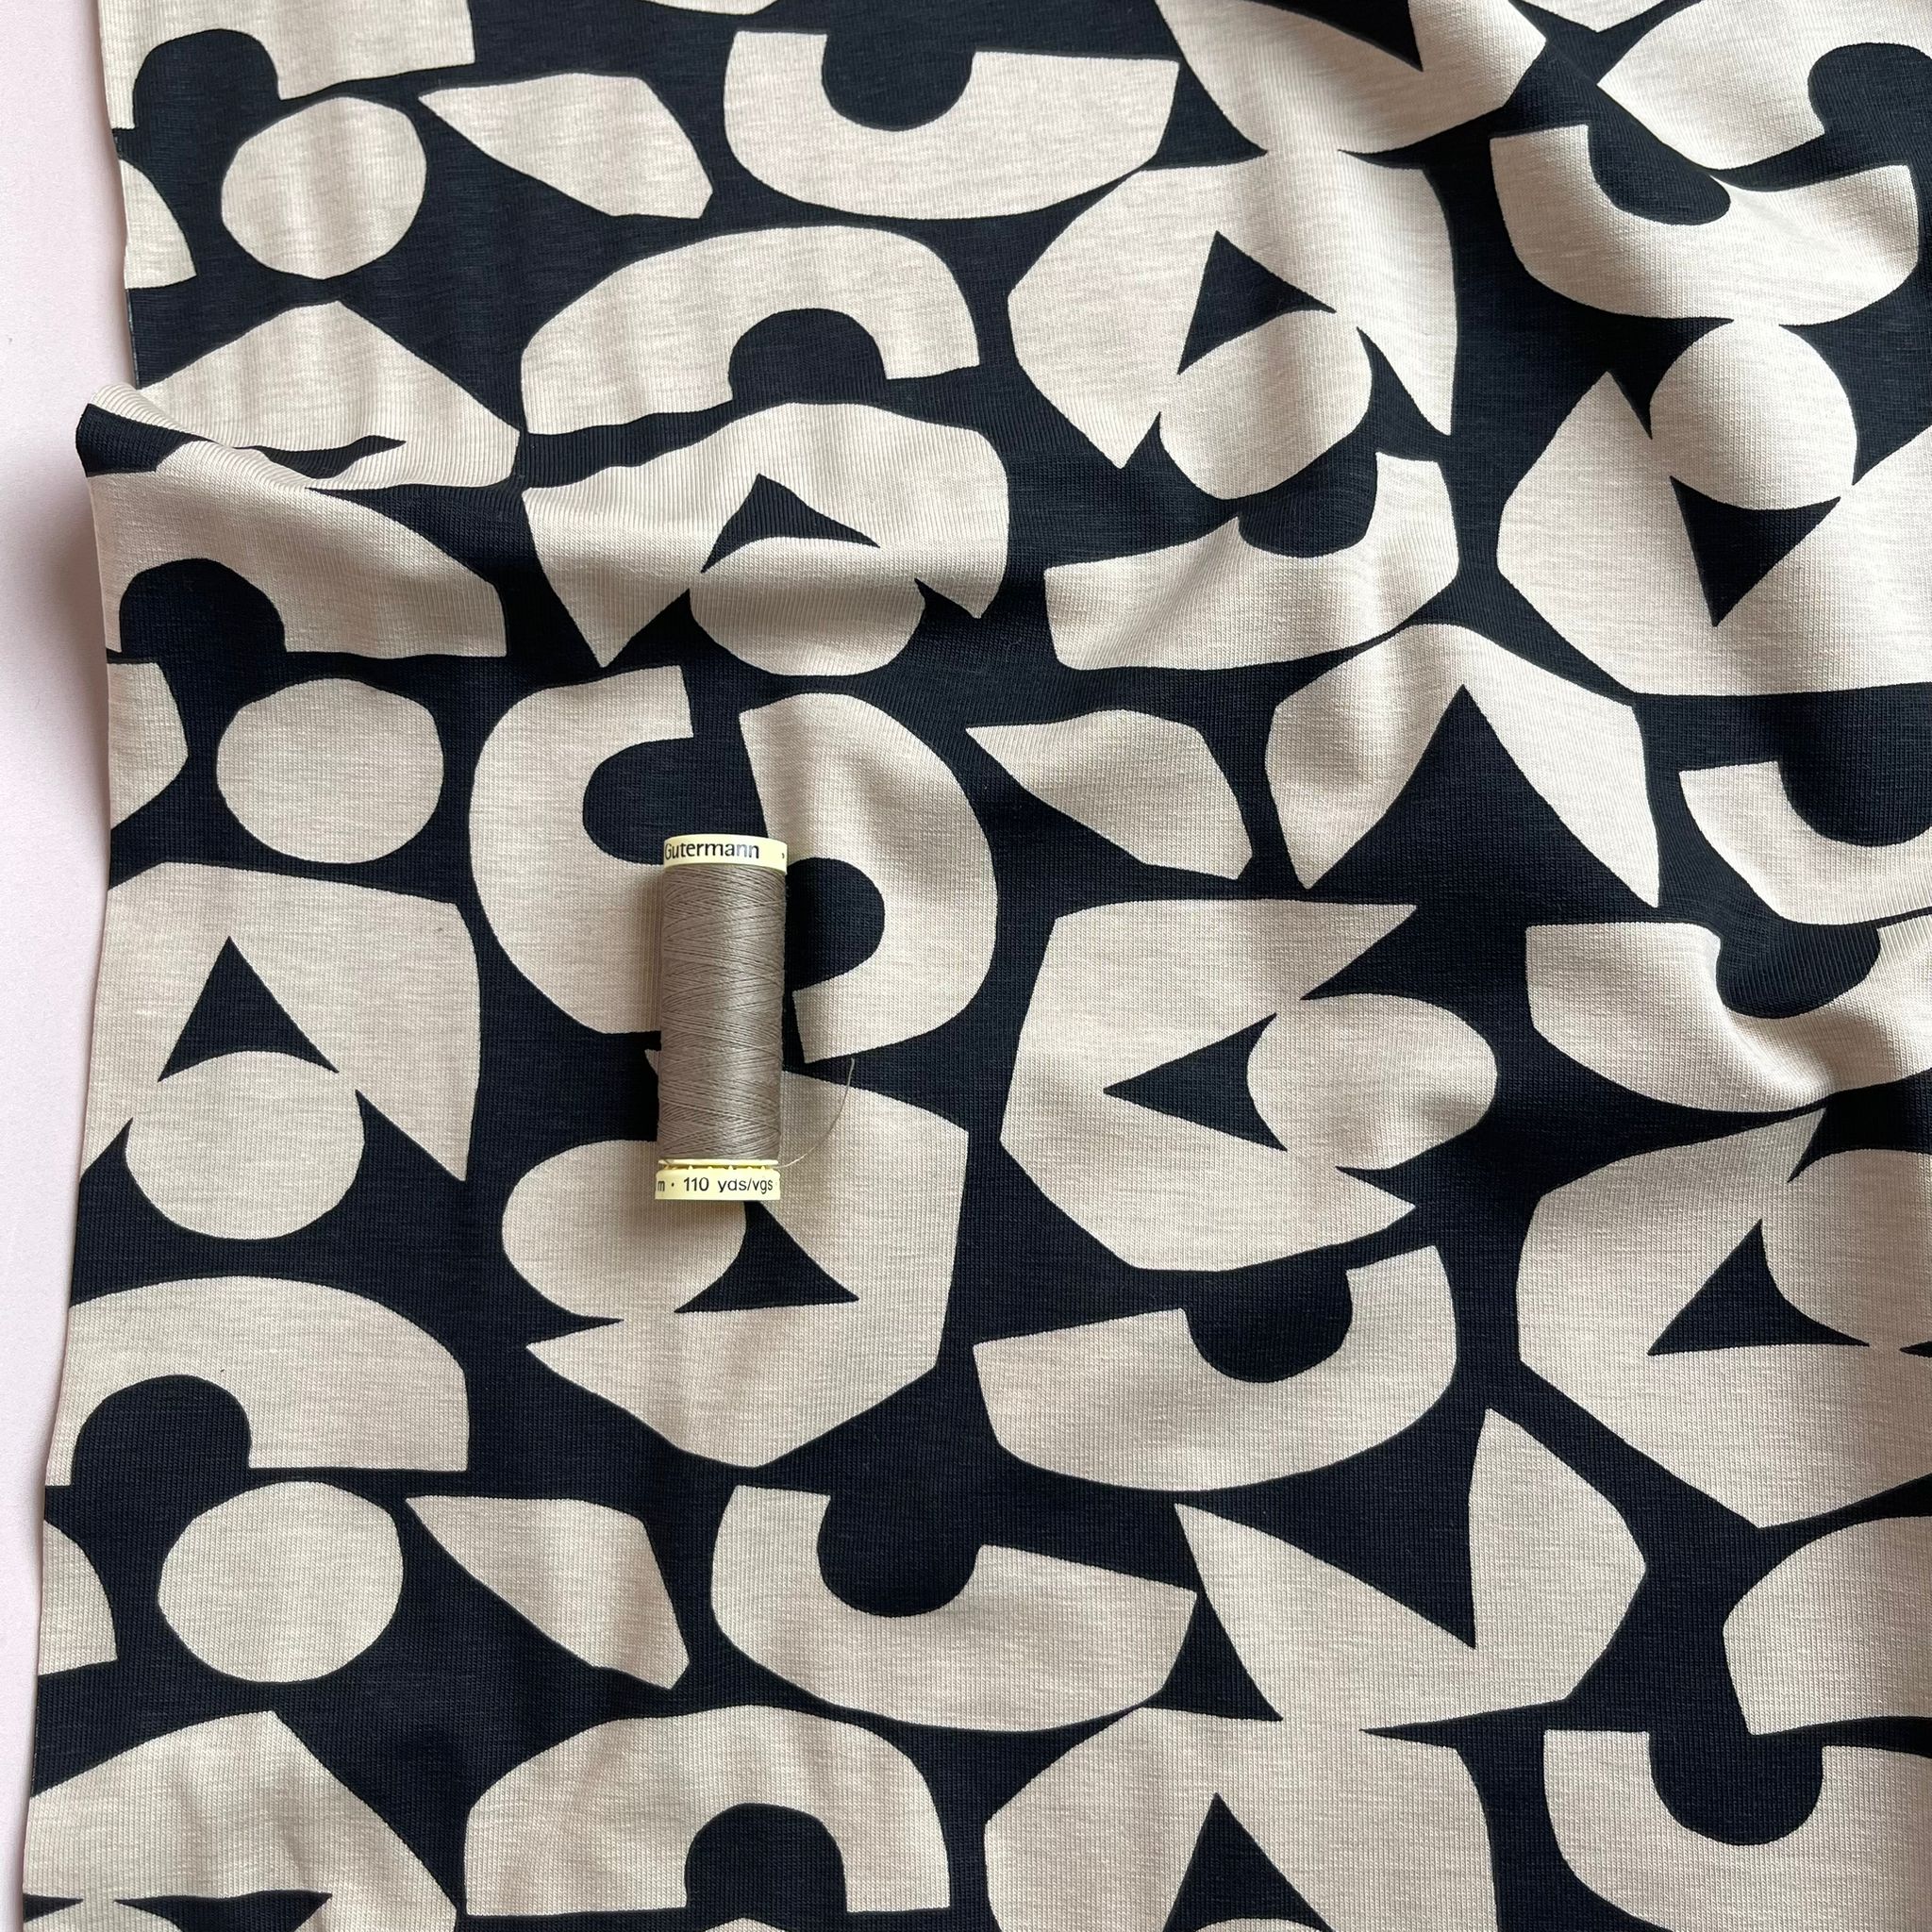 Cream Shapes on Black Combed Cotton Jersey Fabric